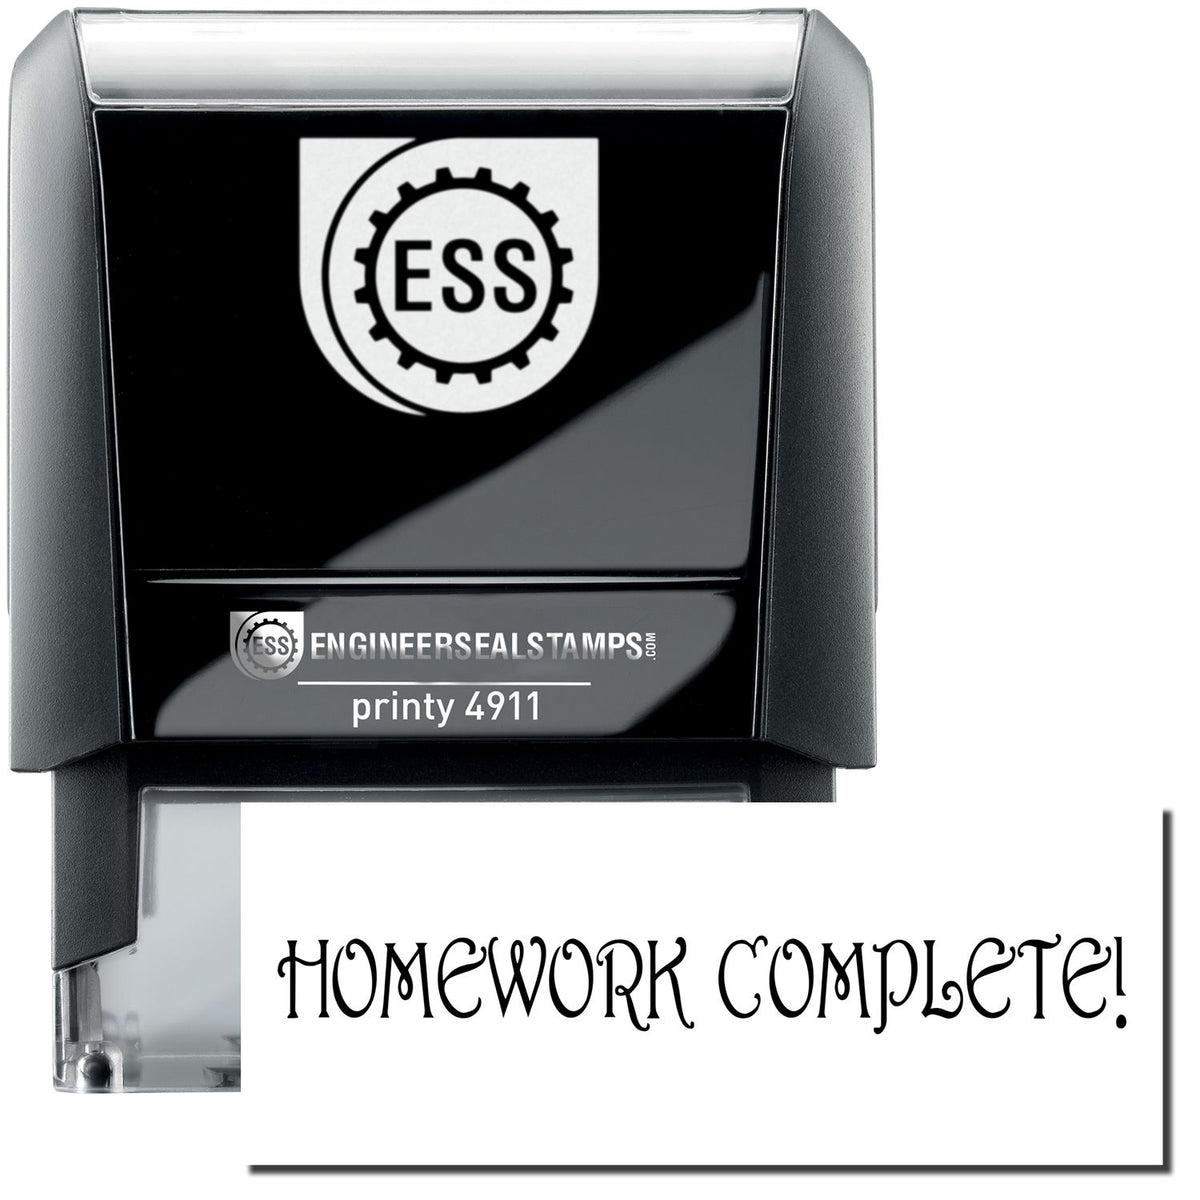 A self-inking stamp with a stamped image showing how the text &quot;HOMEWORK COMPLETE!&quot; is displayed after stamping.